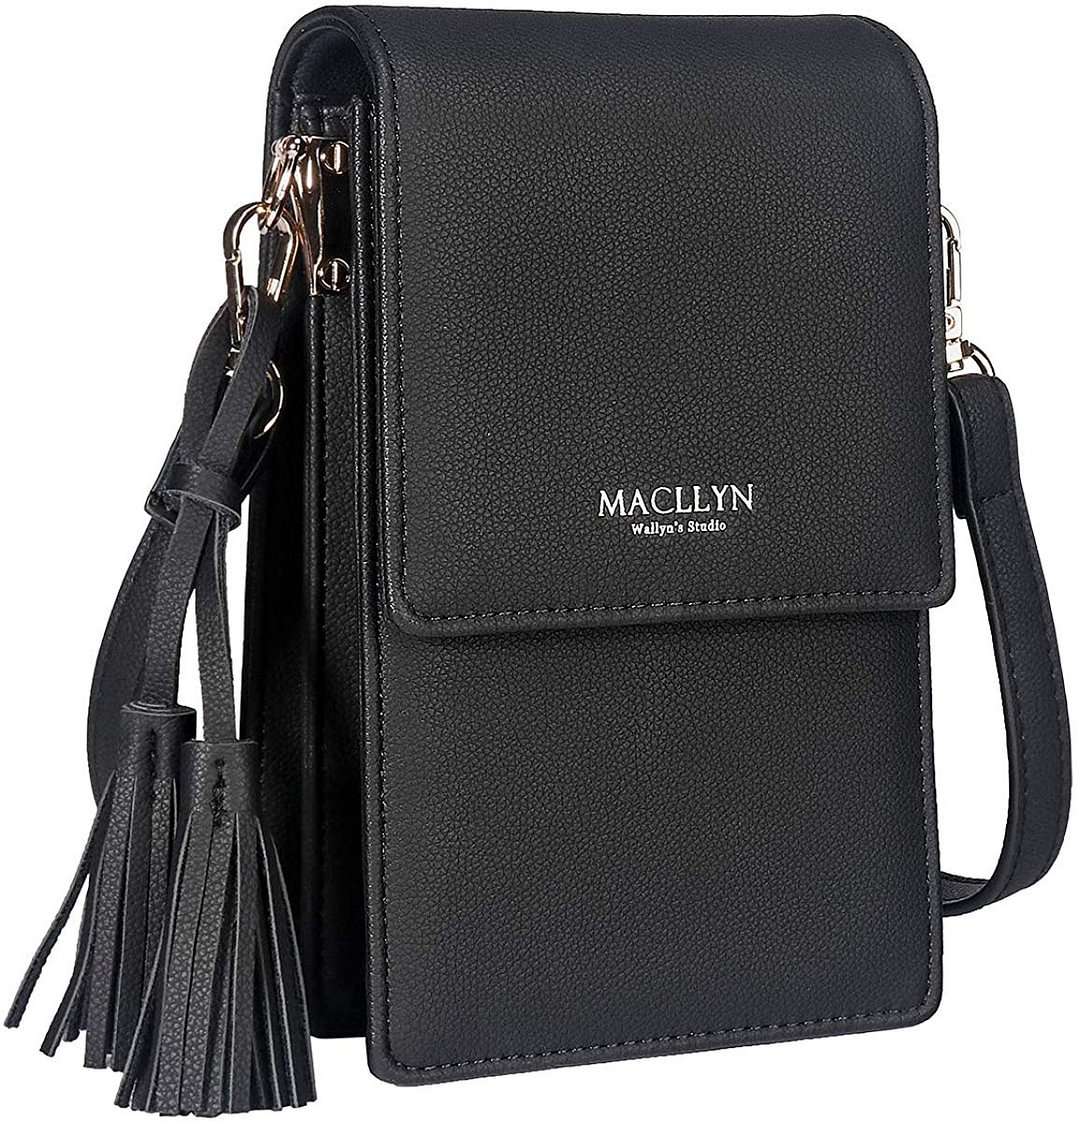 Small Crossbody Bag Cell Phone Purse Wallet with Credit Card Slots for Women